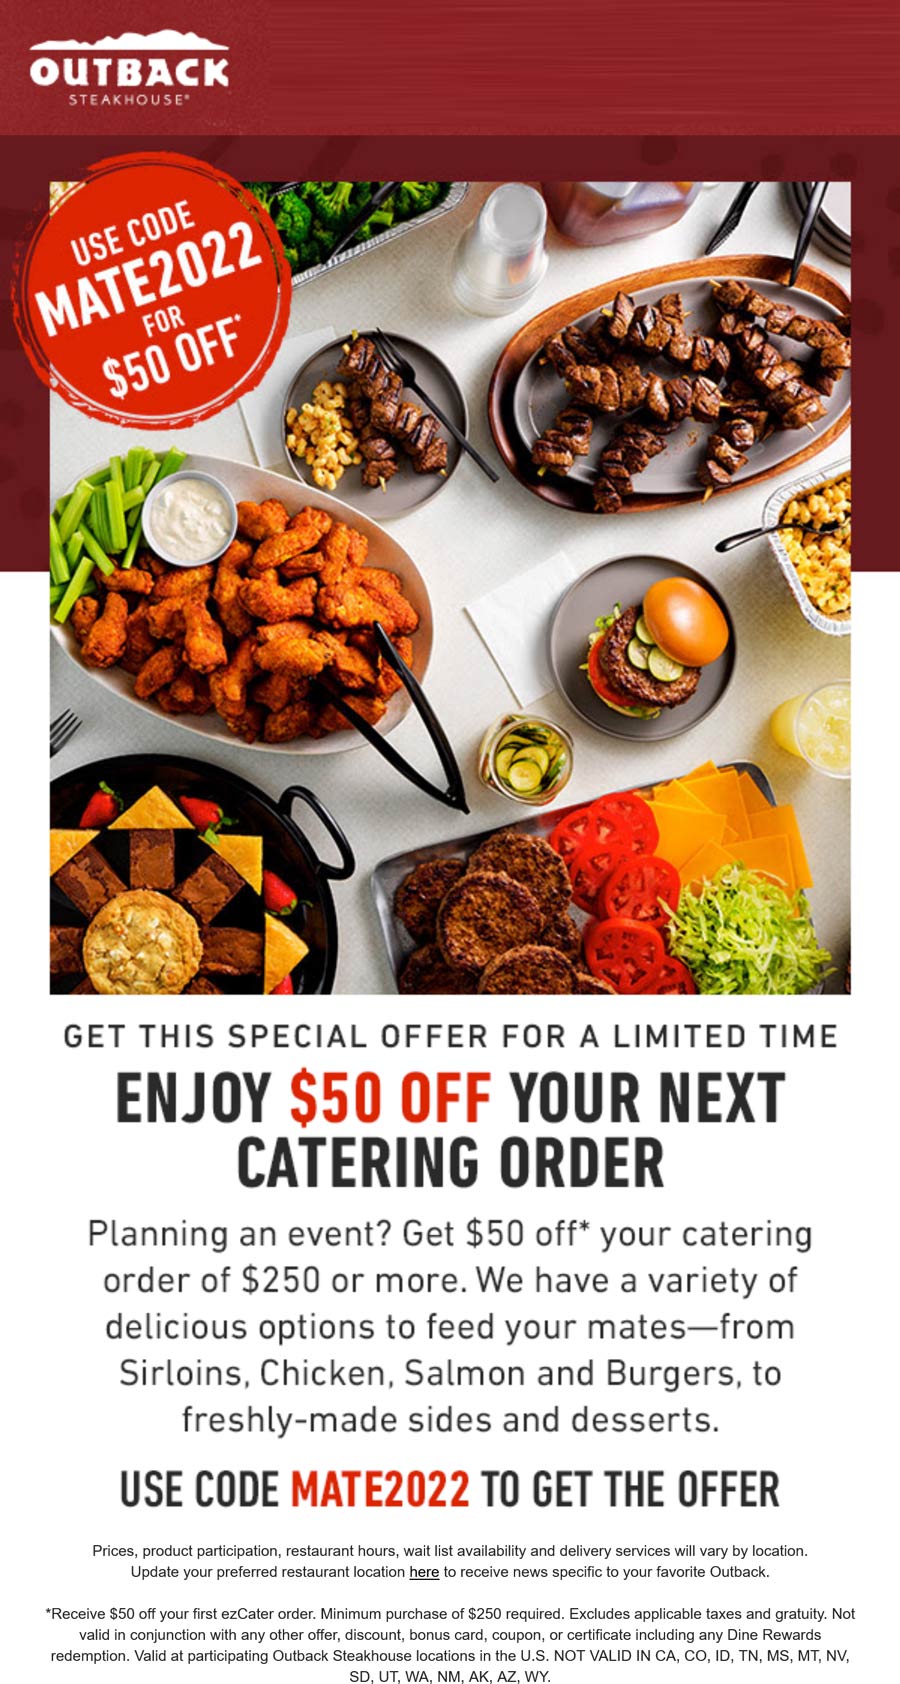 Outback Steakhouse restaurants Coupon  $50 off $250 catering at Outback Steakhouse via promo code MATE2022 #outbacksteakhouse 